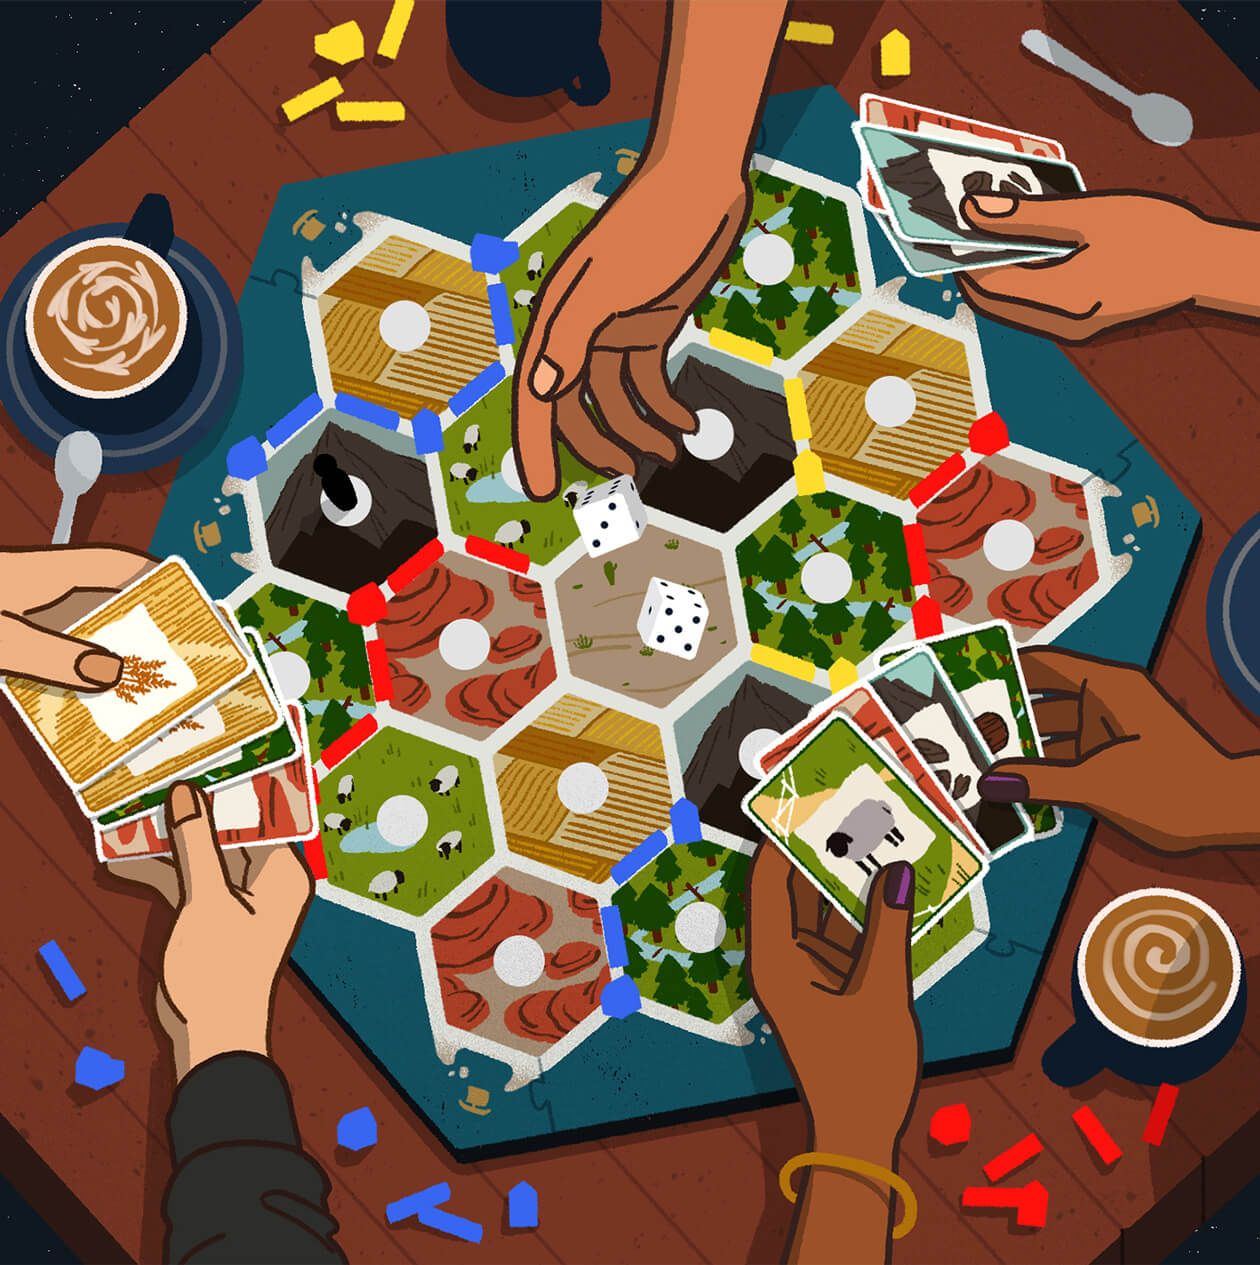 Play Catan, Monopoly, And More Online With Friends